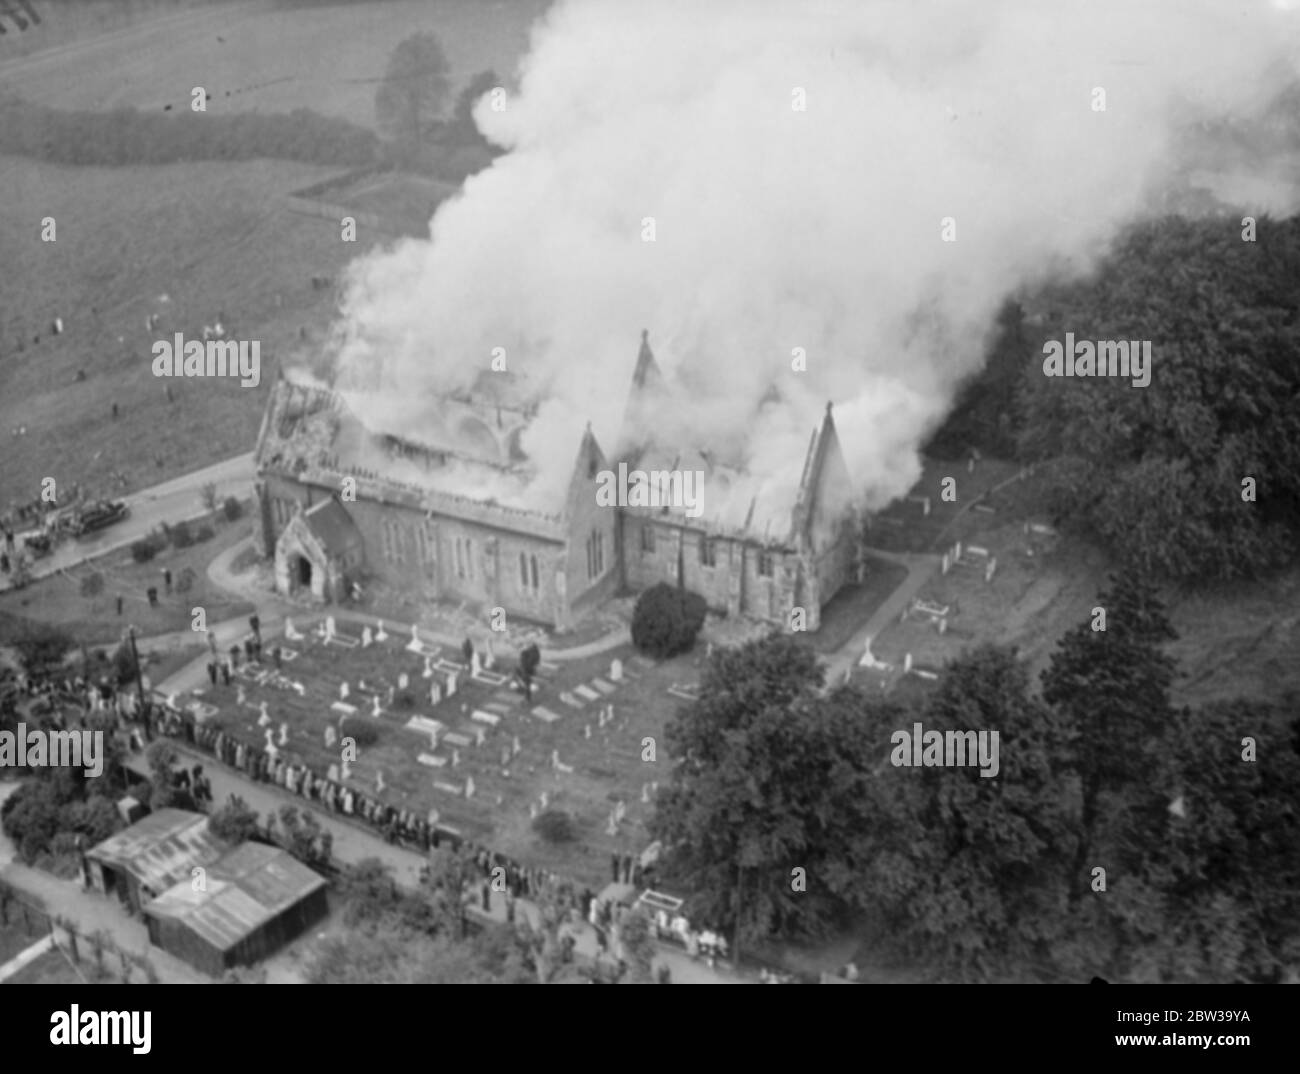 Bishop Stortford church completely destroyed by fire . Fire brigades hampered by water shortage . 21 June 1935 Stock Photo